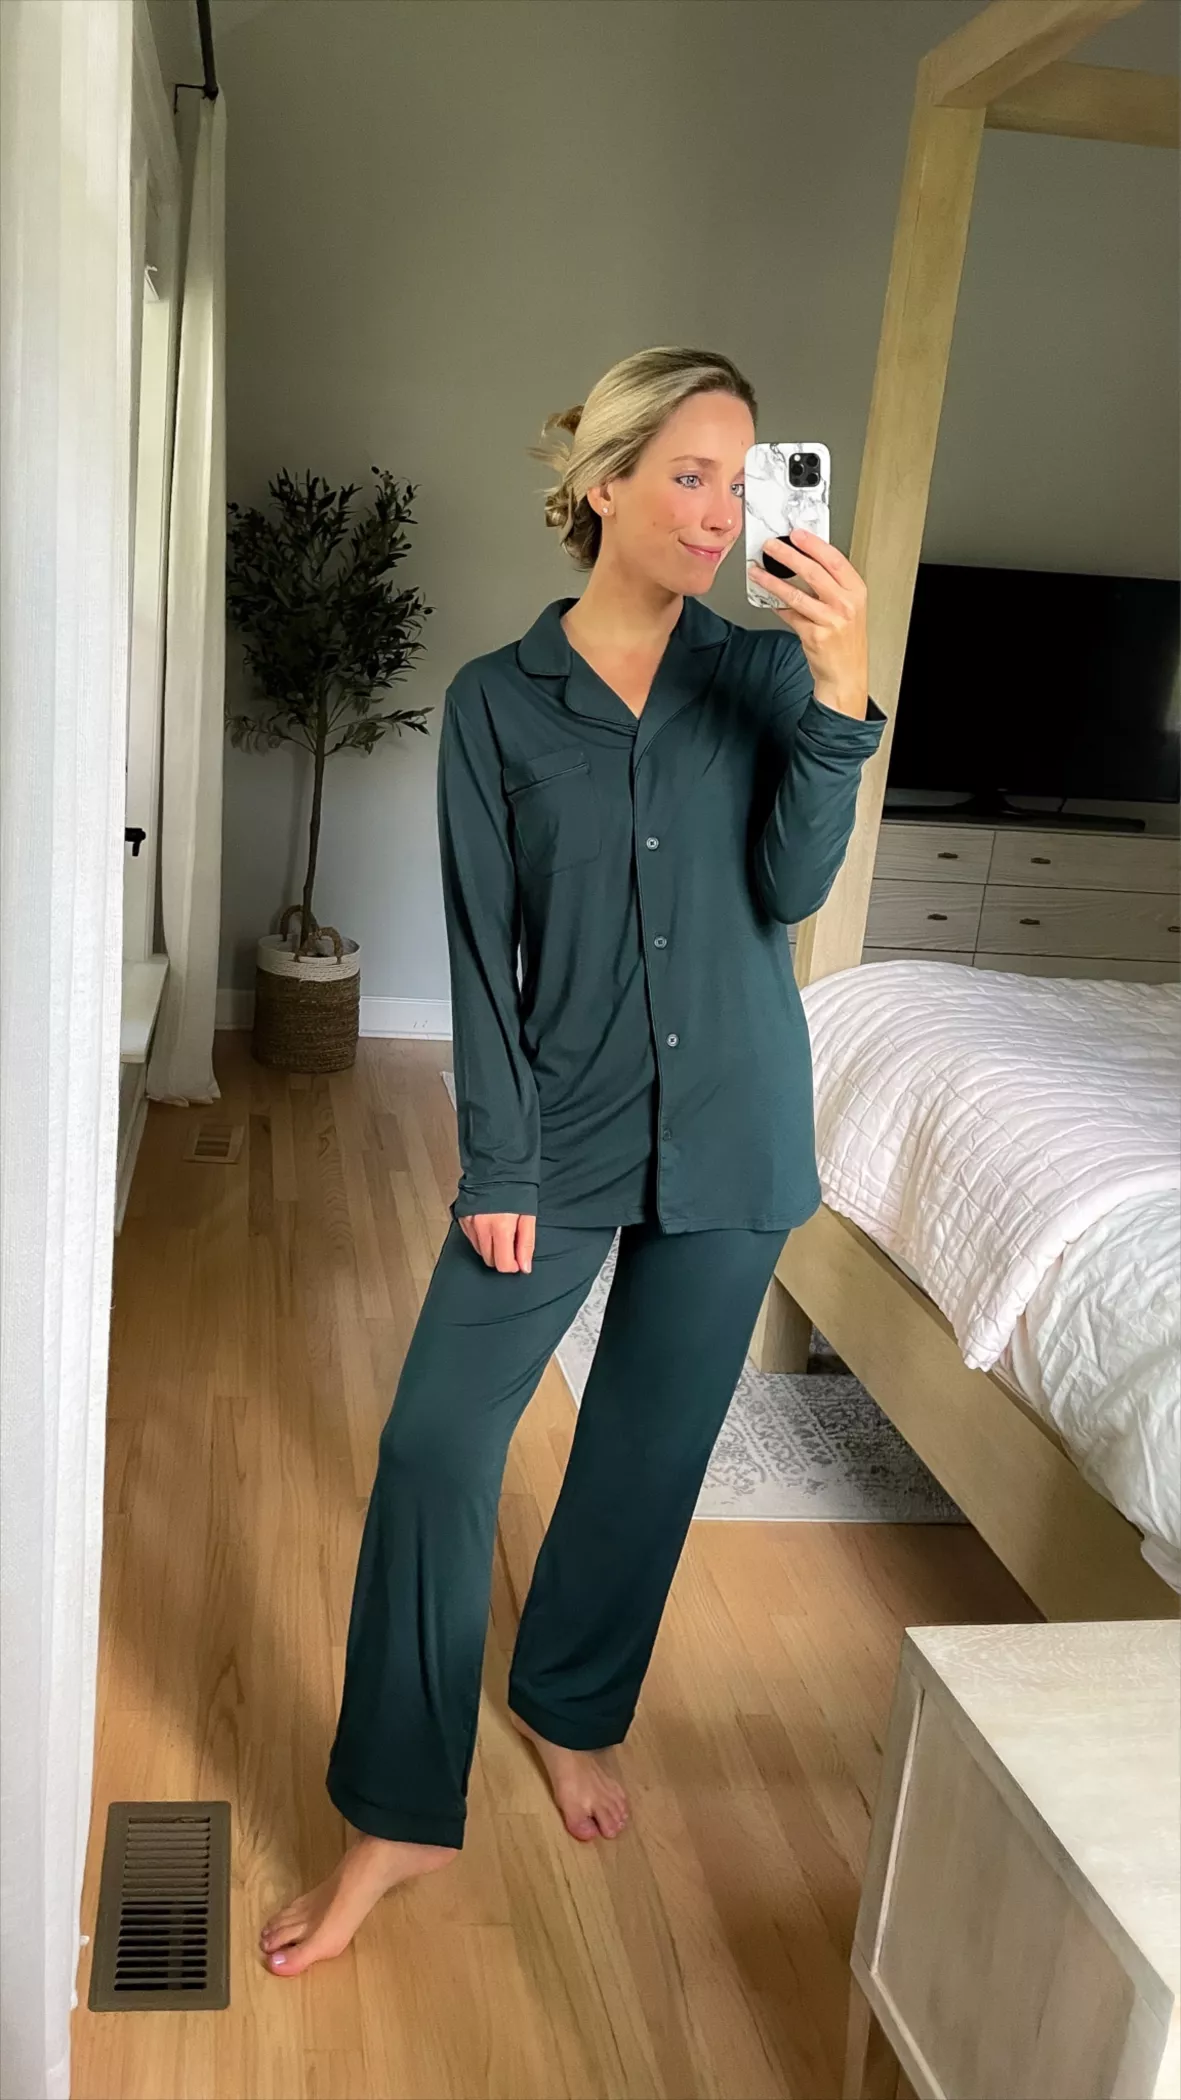 Shop All Loungewear – Kindred Bravely